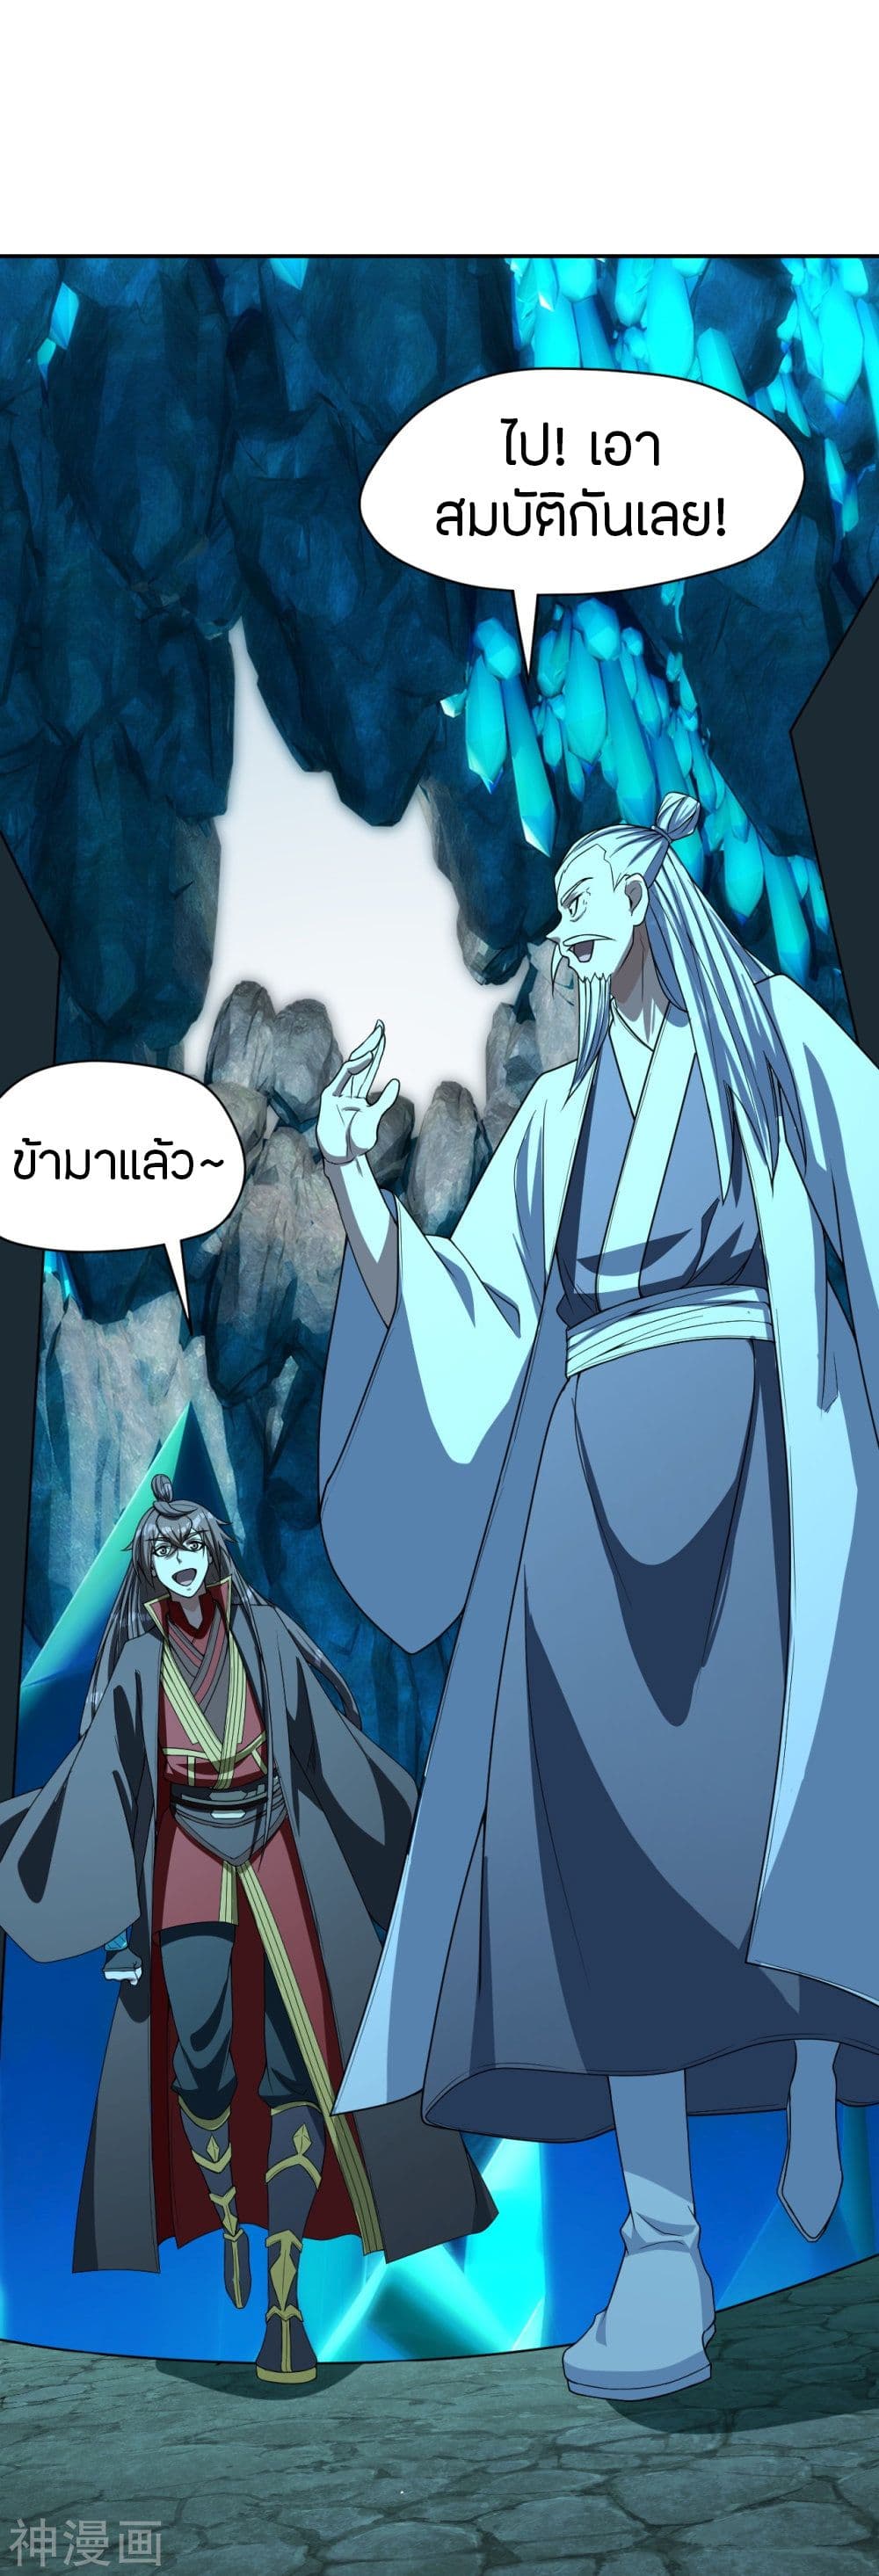 Banished Disciple's Counterattack เธเธฑเธเธฃเธเธฃเธฃเธ”เธดเน€เธเธตเธขเธเธขเธธเธ—เธ 239 (46)